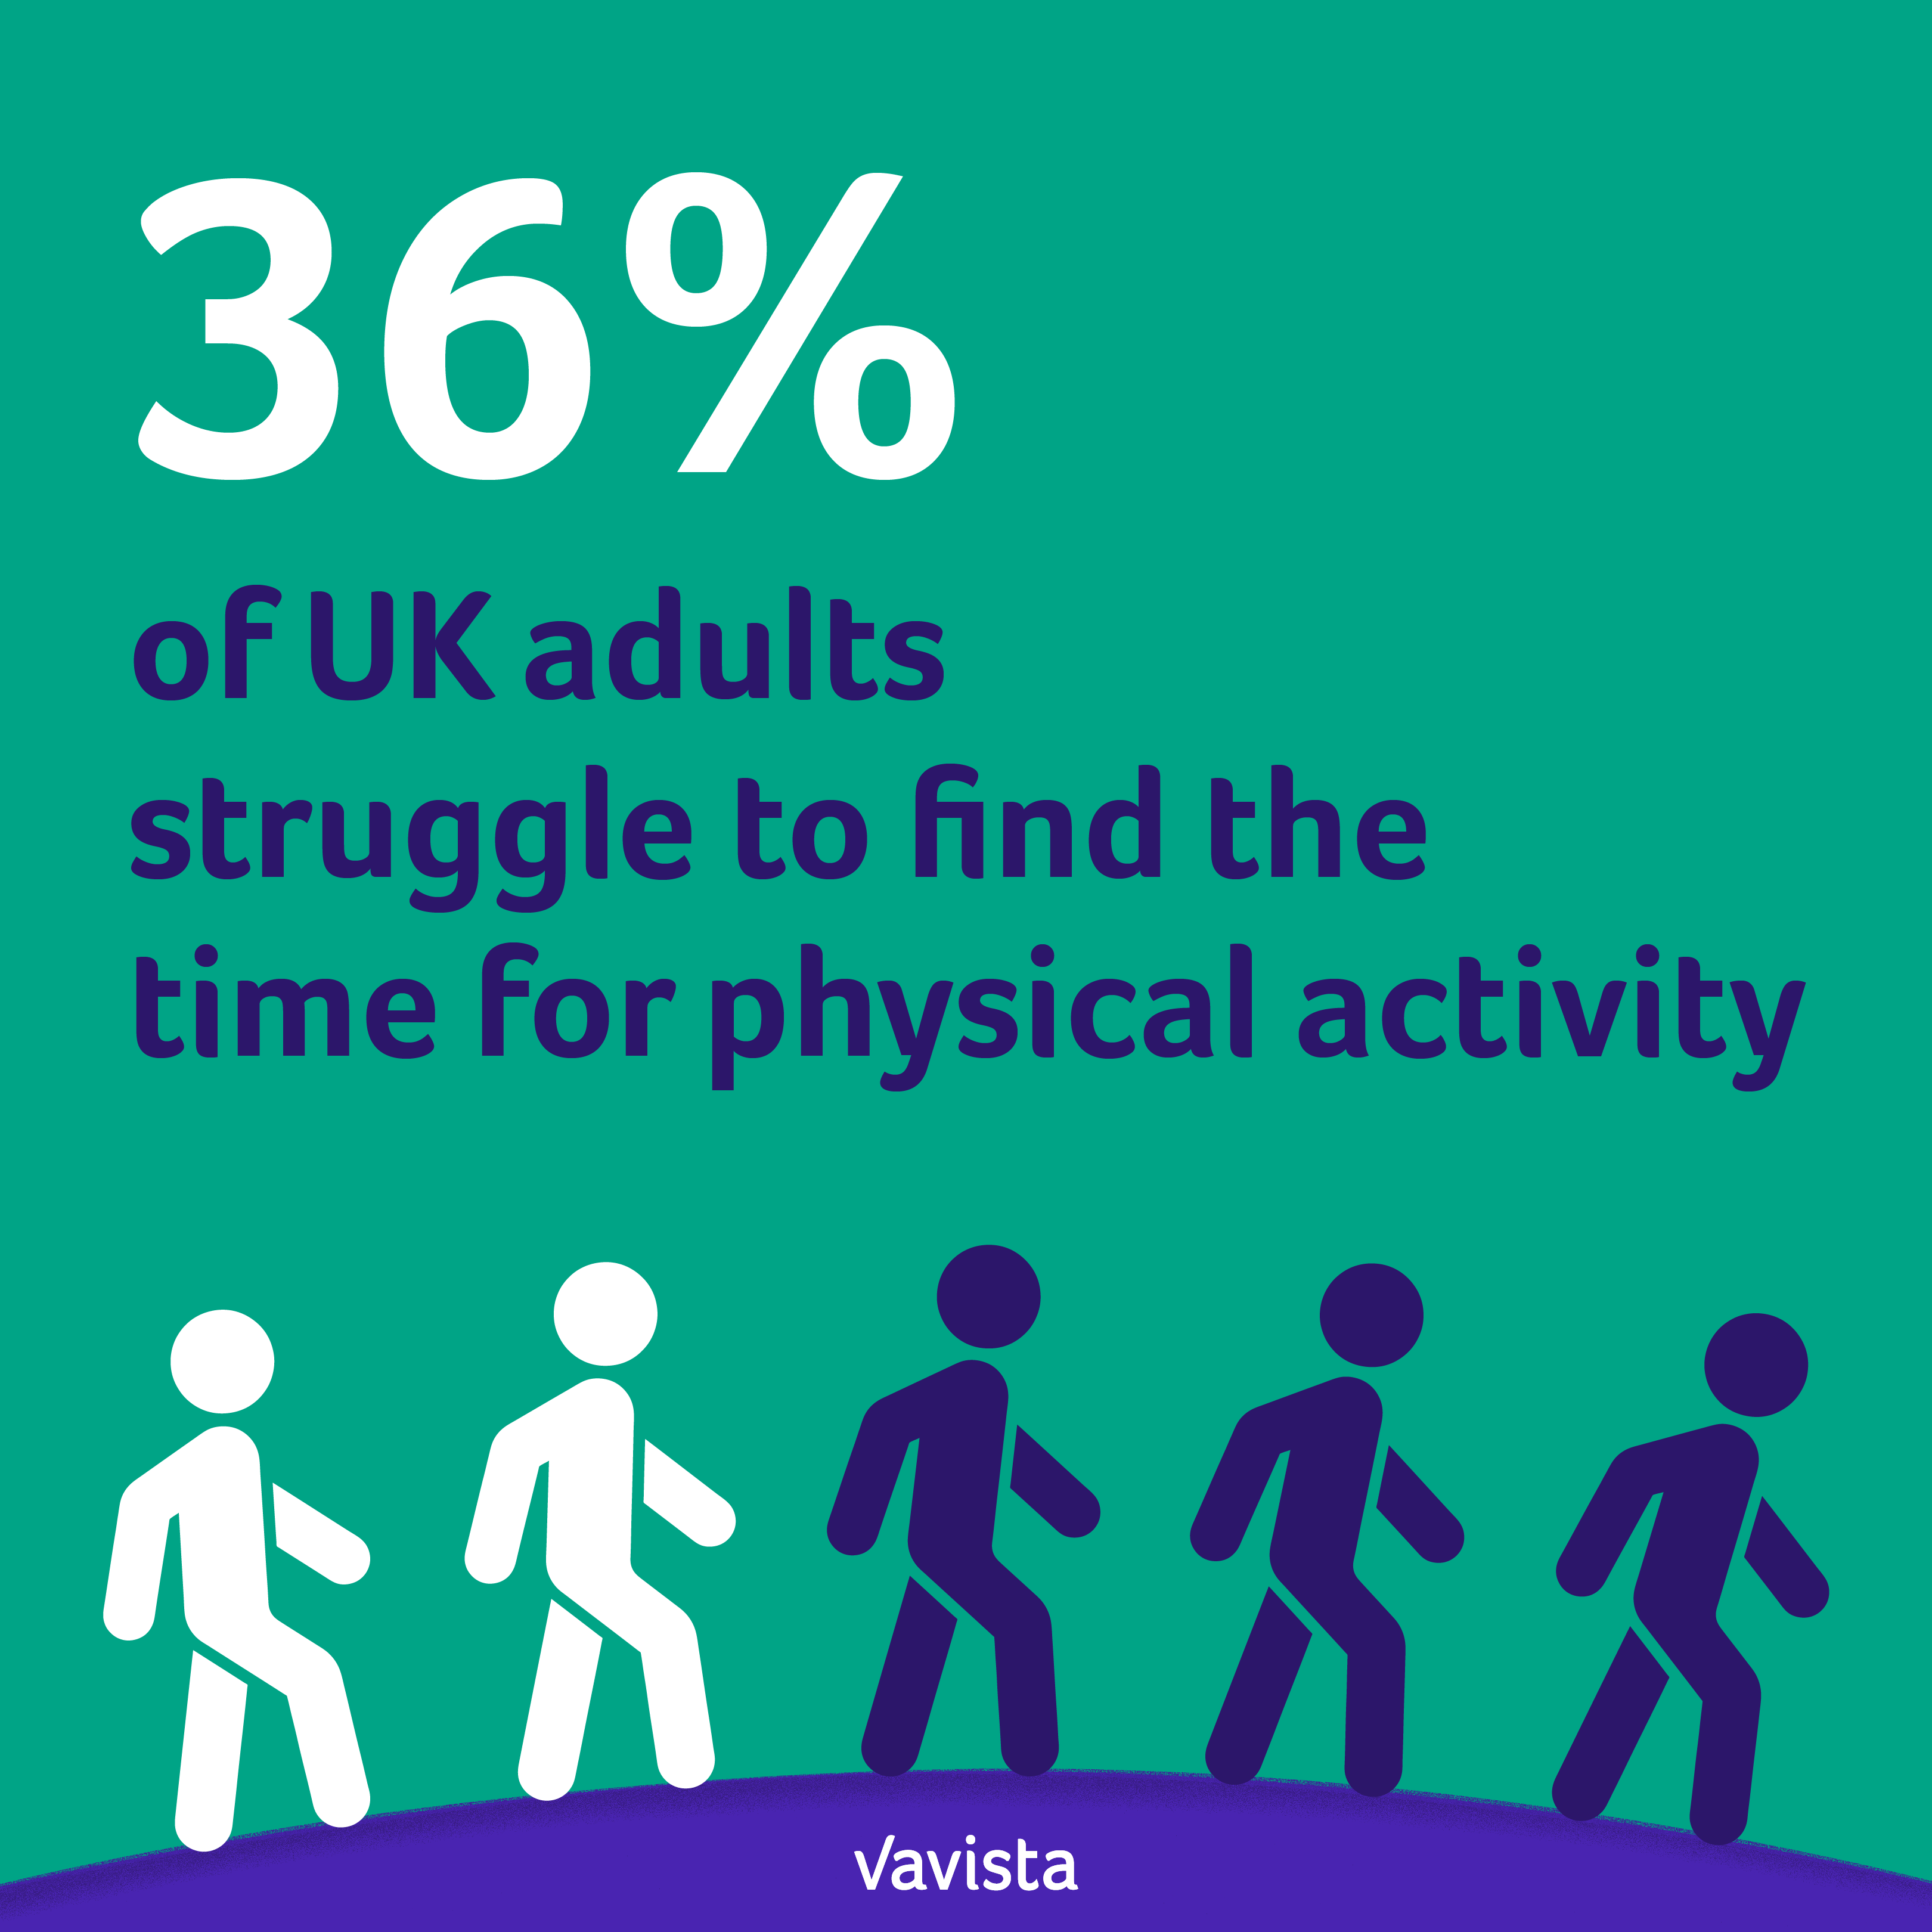 Illustration with statistic on physical activity in the UK